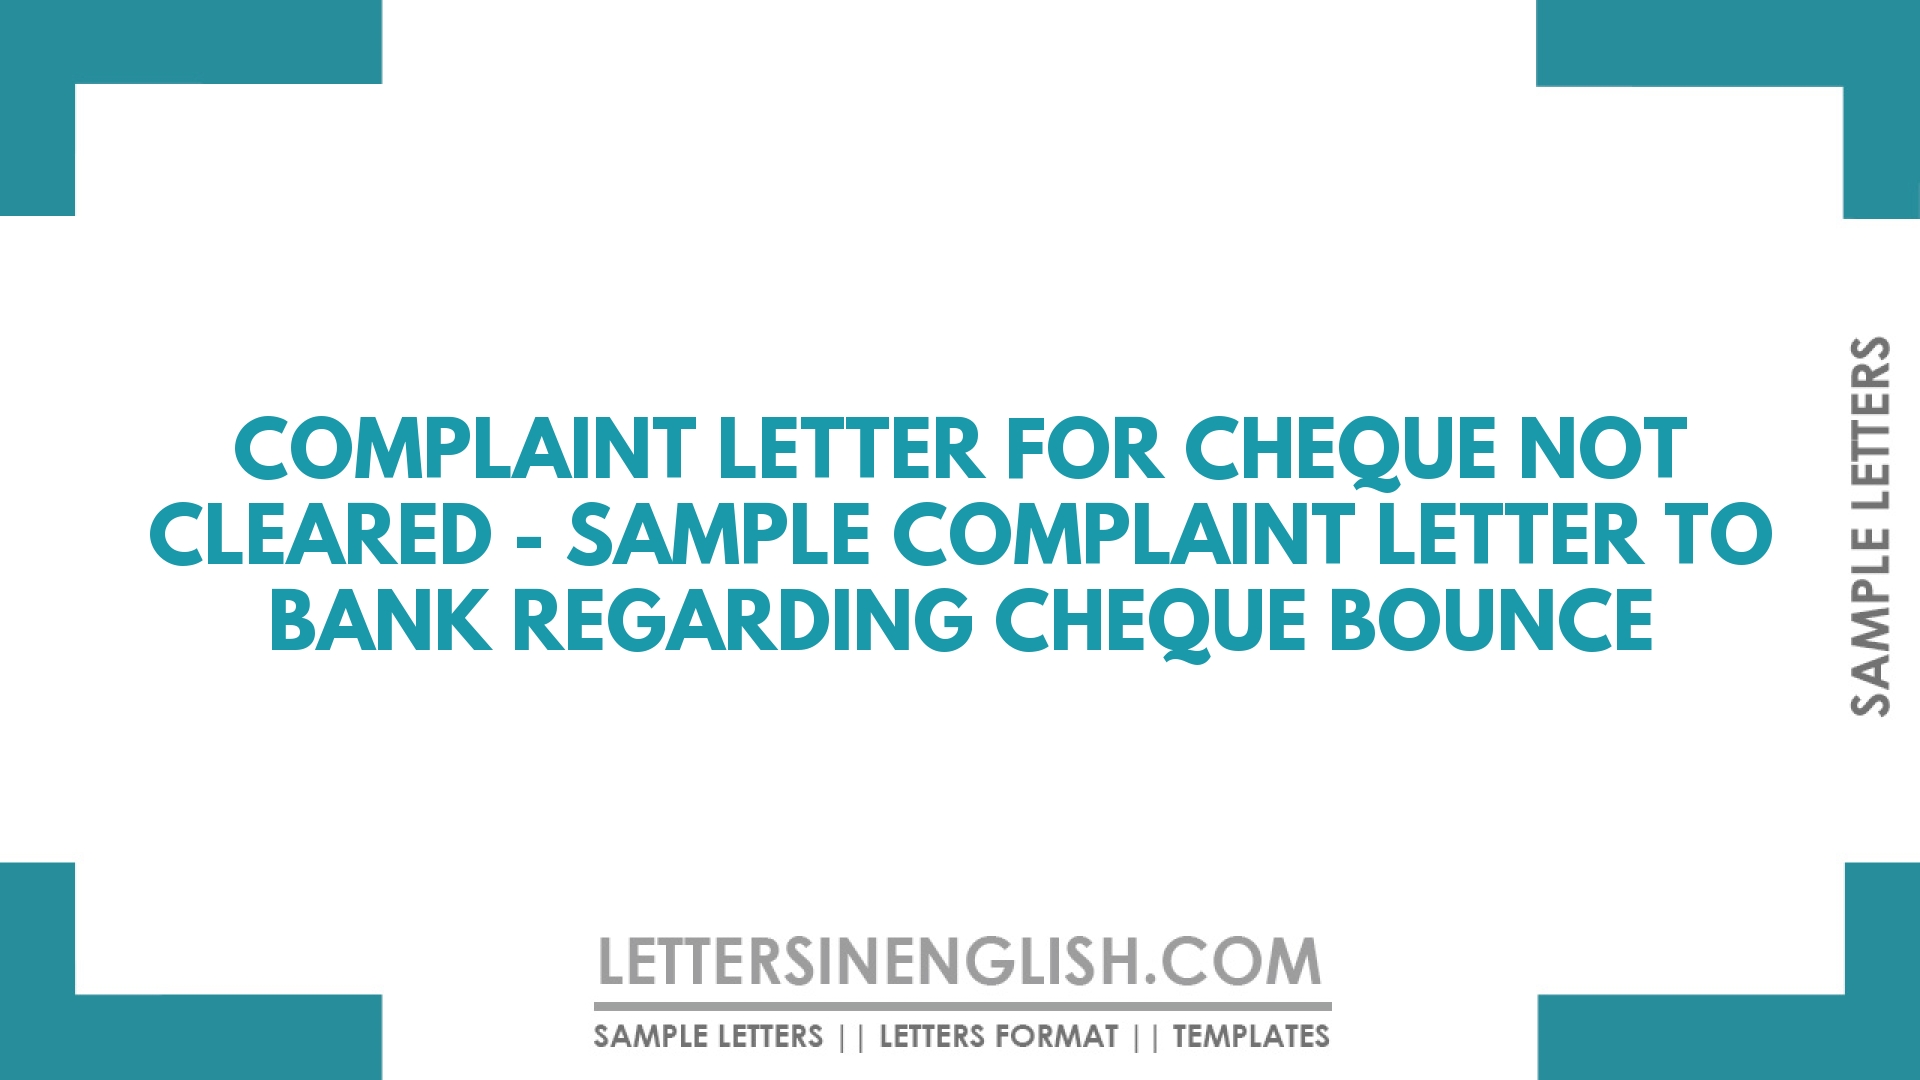 Complaint Letter for Cheque not Cleared – Sample Complaint Letter to Bank Regarding Cheque Bounce